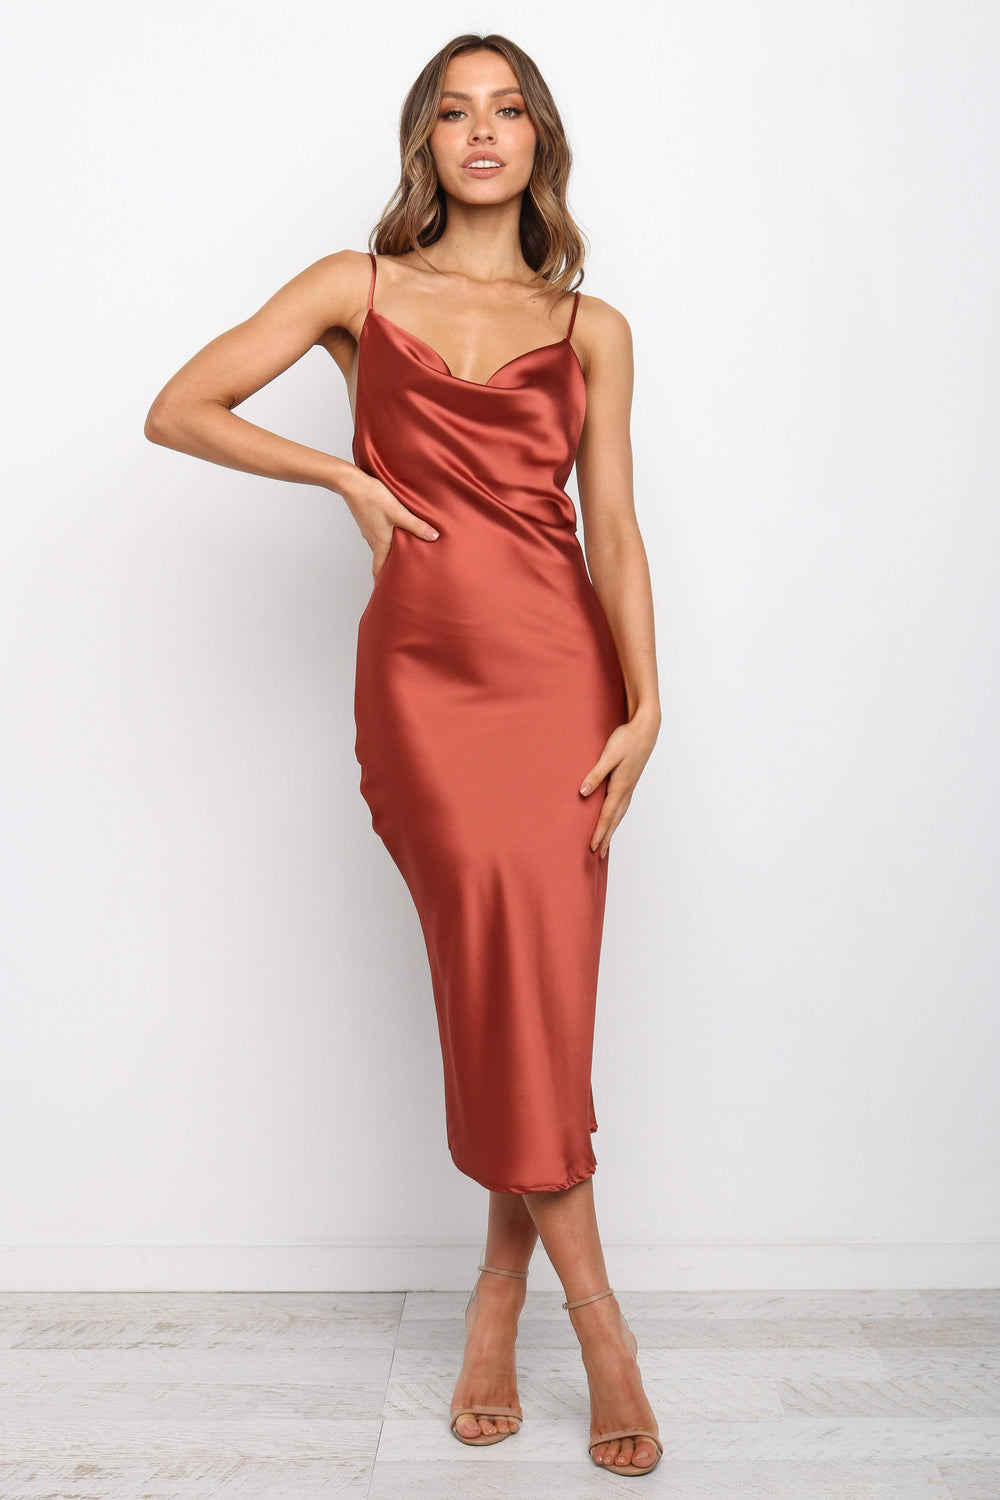 DRESSES Persia Dress - Rust  Stunning cowl neck, midi dress with adjustable straps in a sexy satin fabrication. Offering a flattering feminine silhouette that can be dressed up or dressed down. Perfect for weddings, date nights, Spring parties, brunch, day events, and more. 